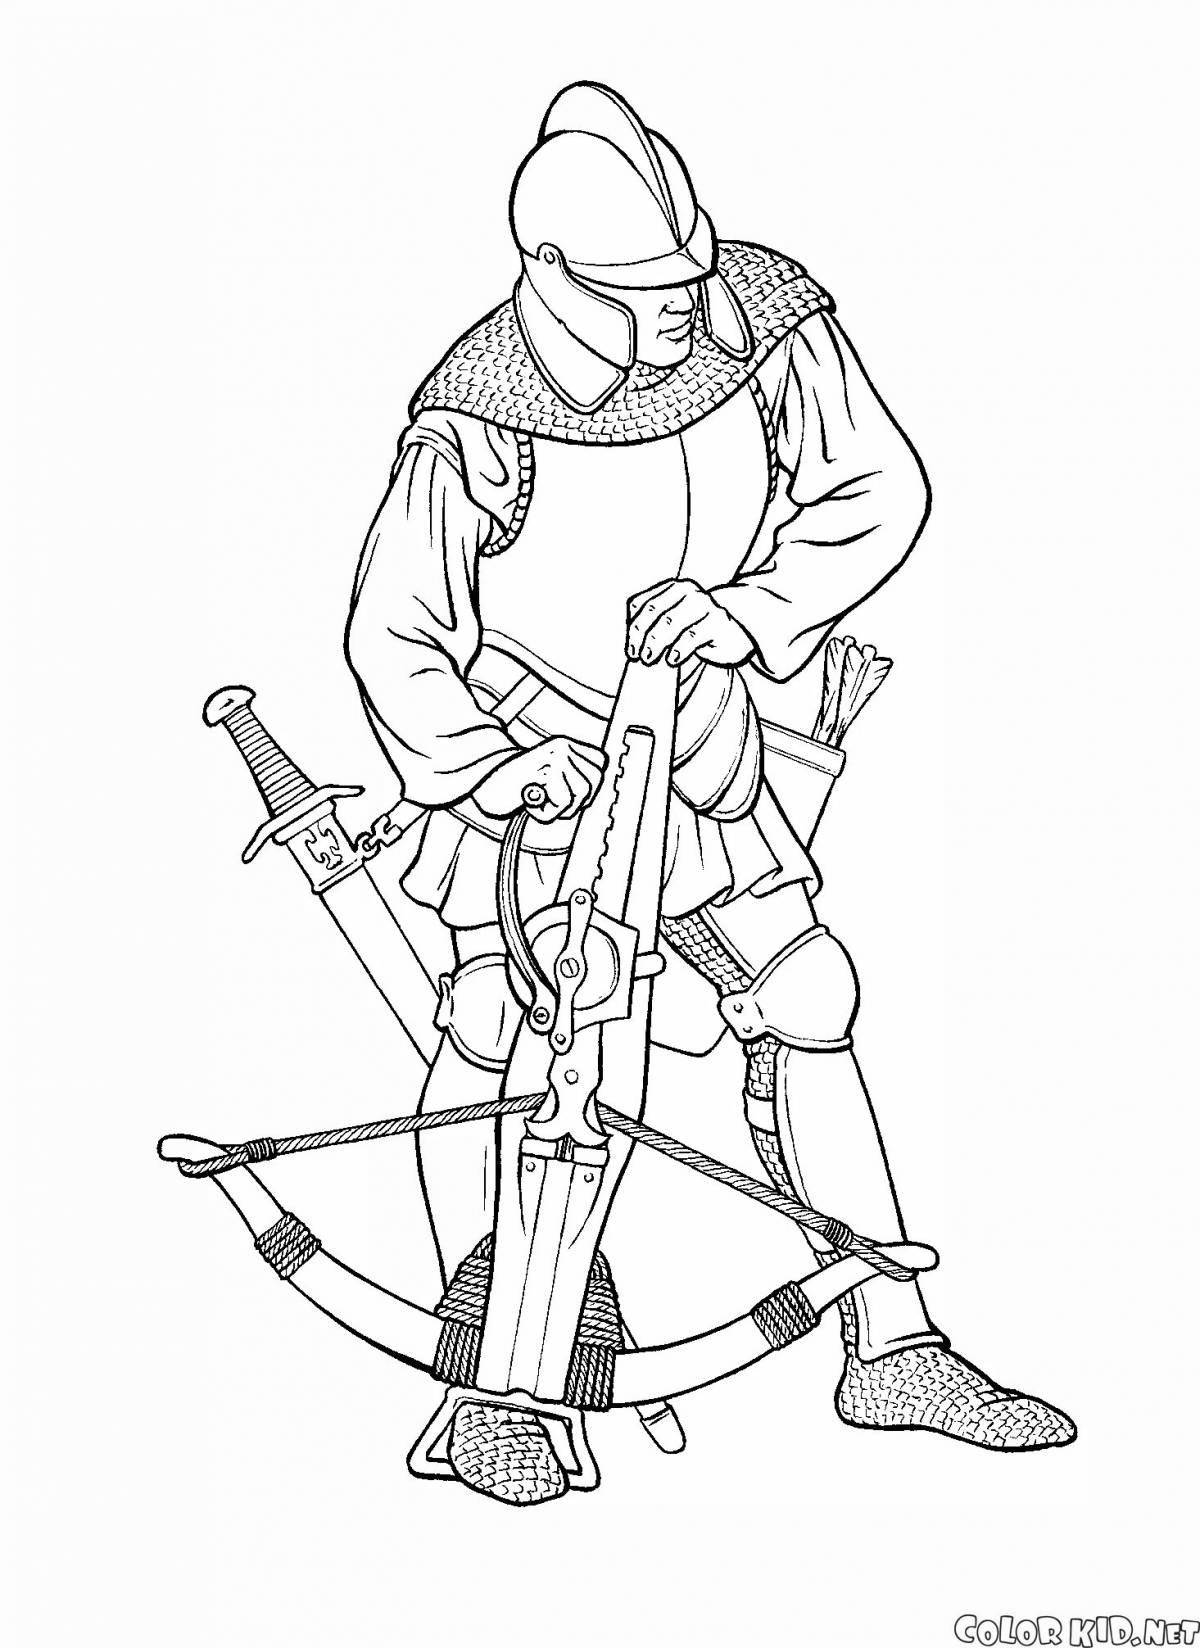 Cute crossbow coloring page for kids